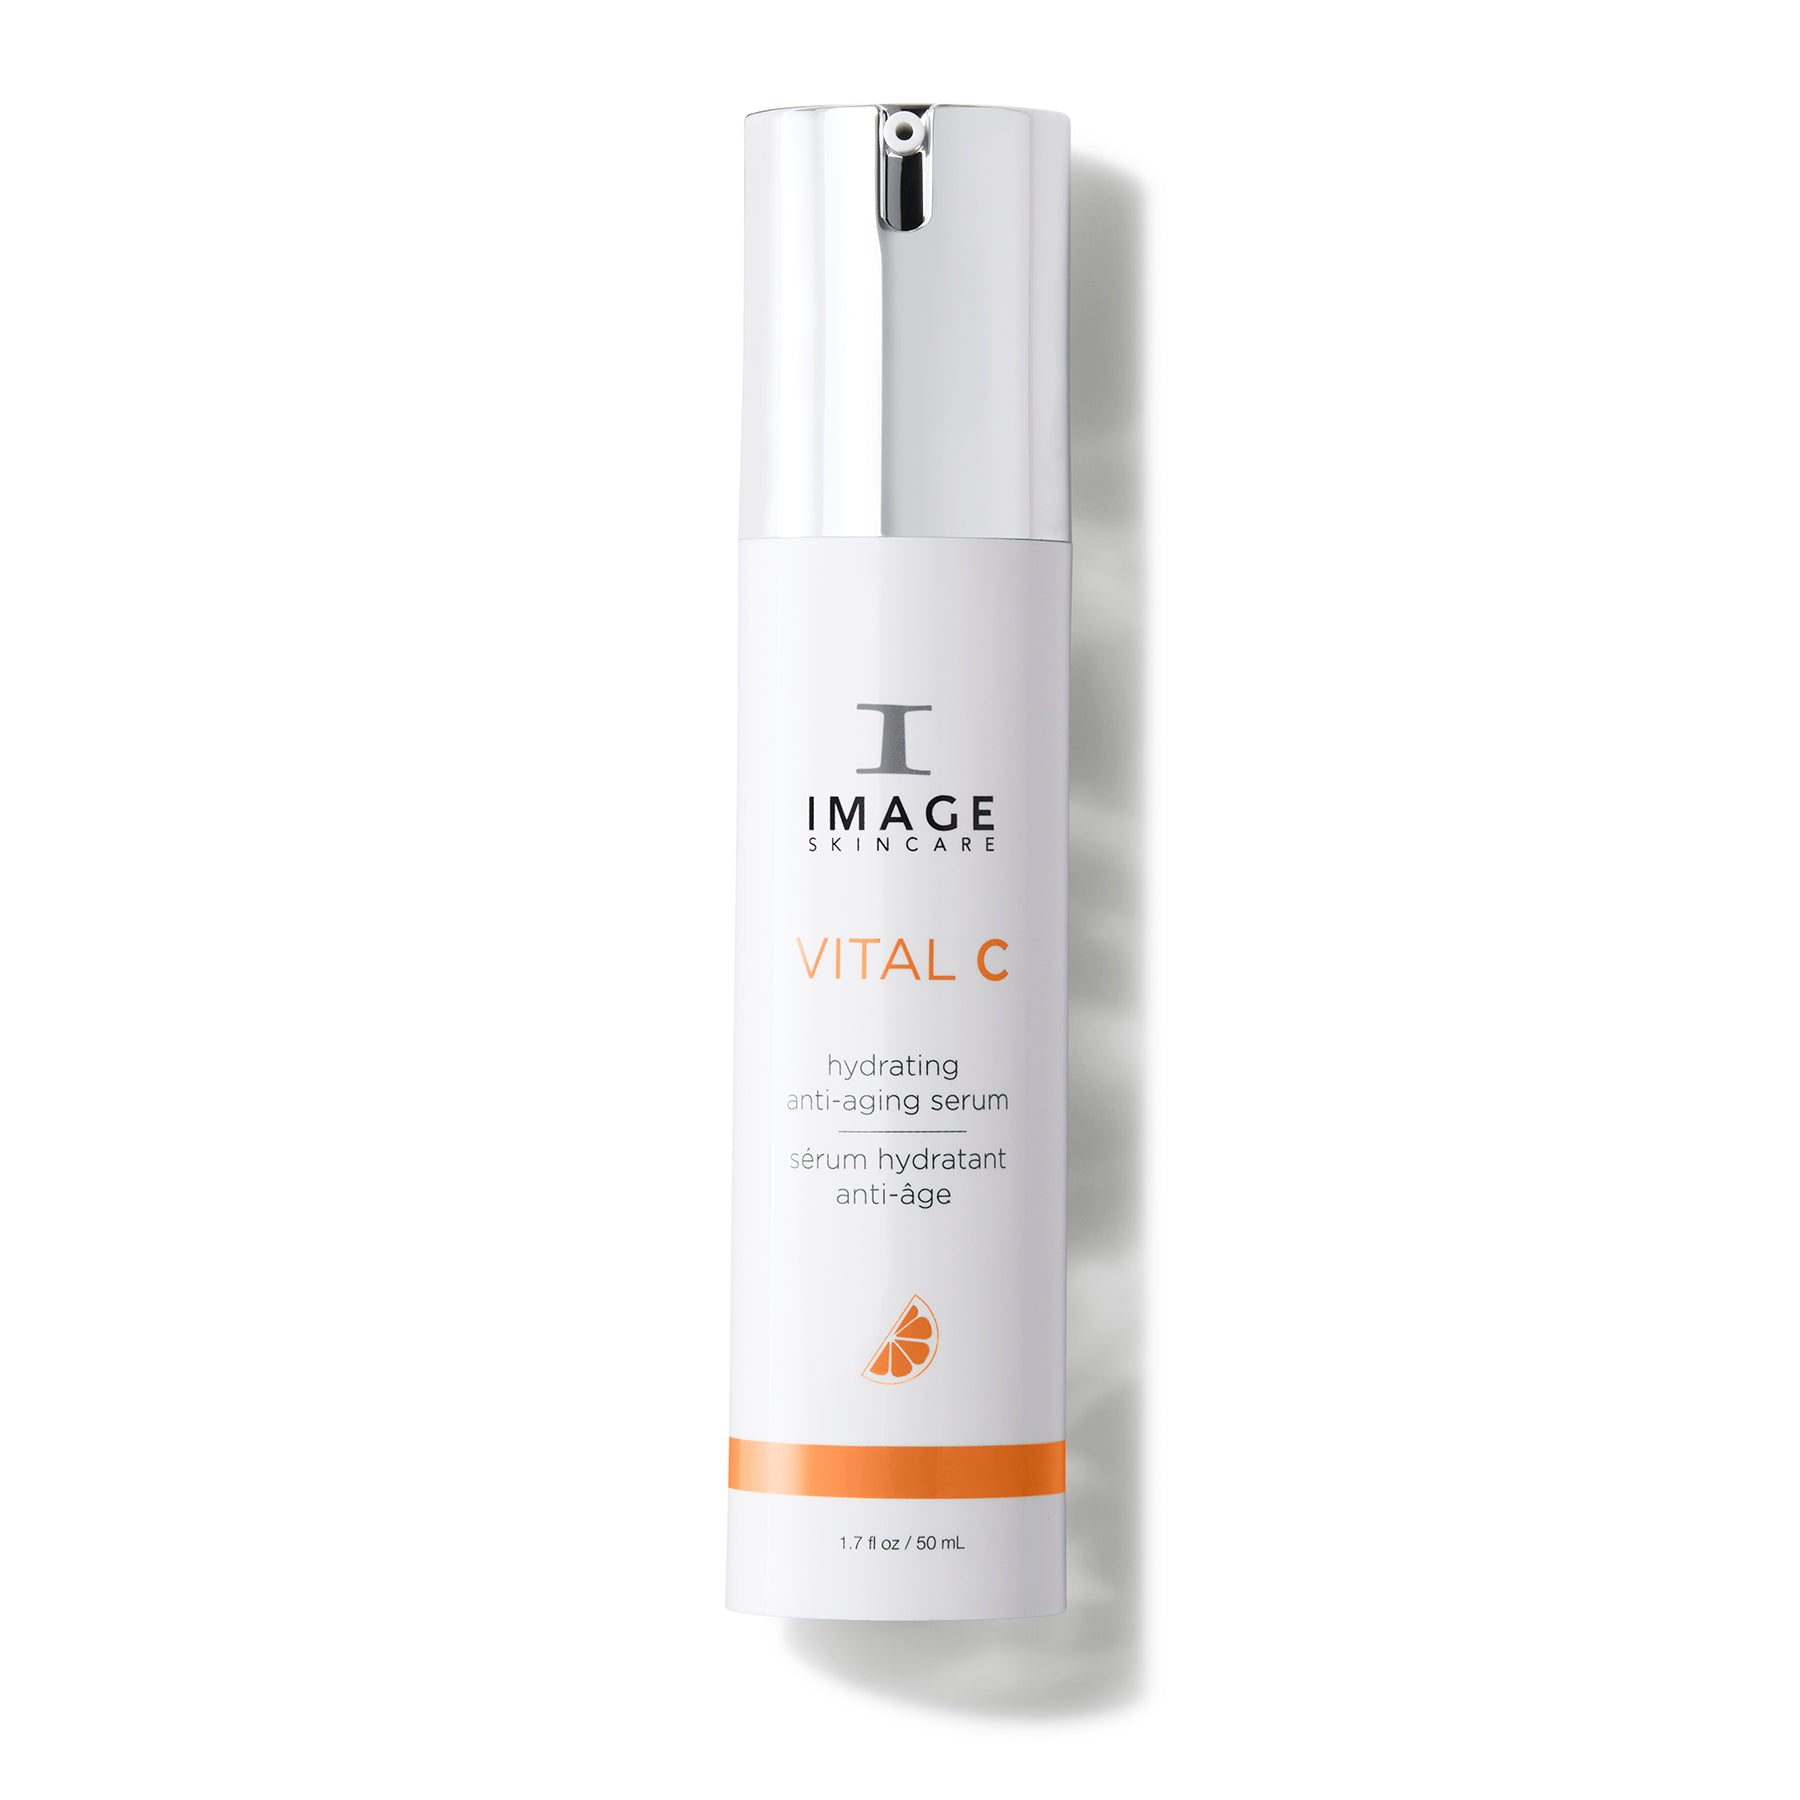 Image Skincare Vital C Hydrating Anti Aging Serum Shop At Exclusive Beauty